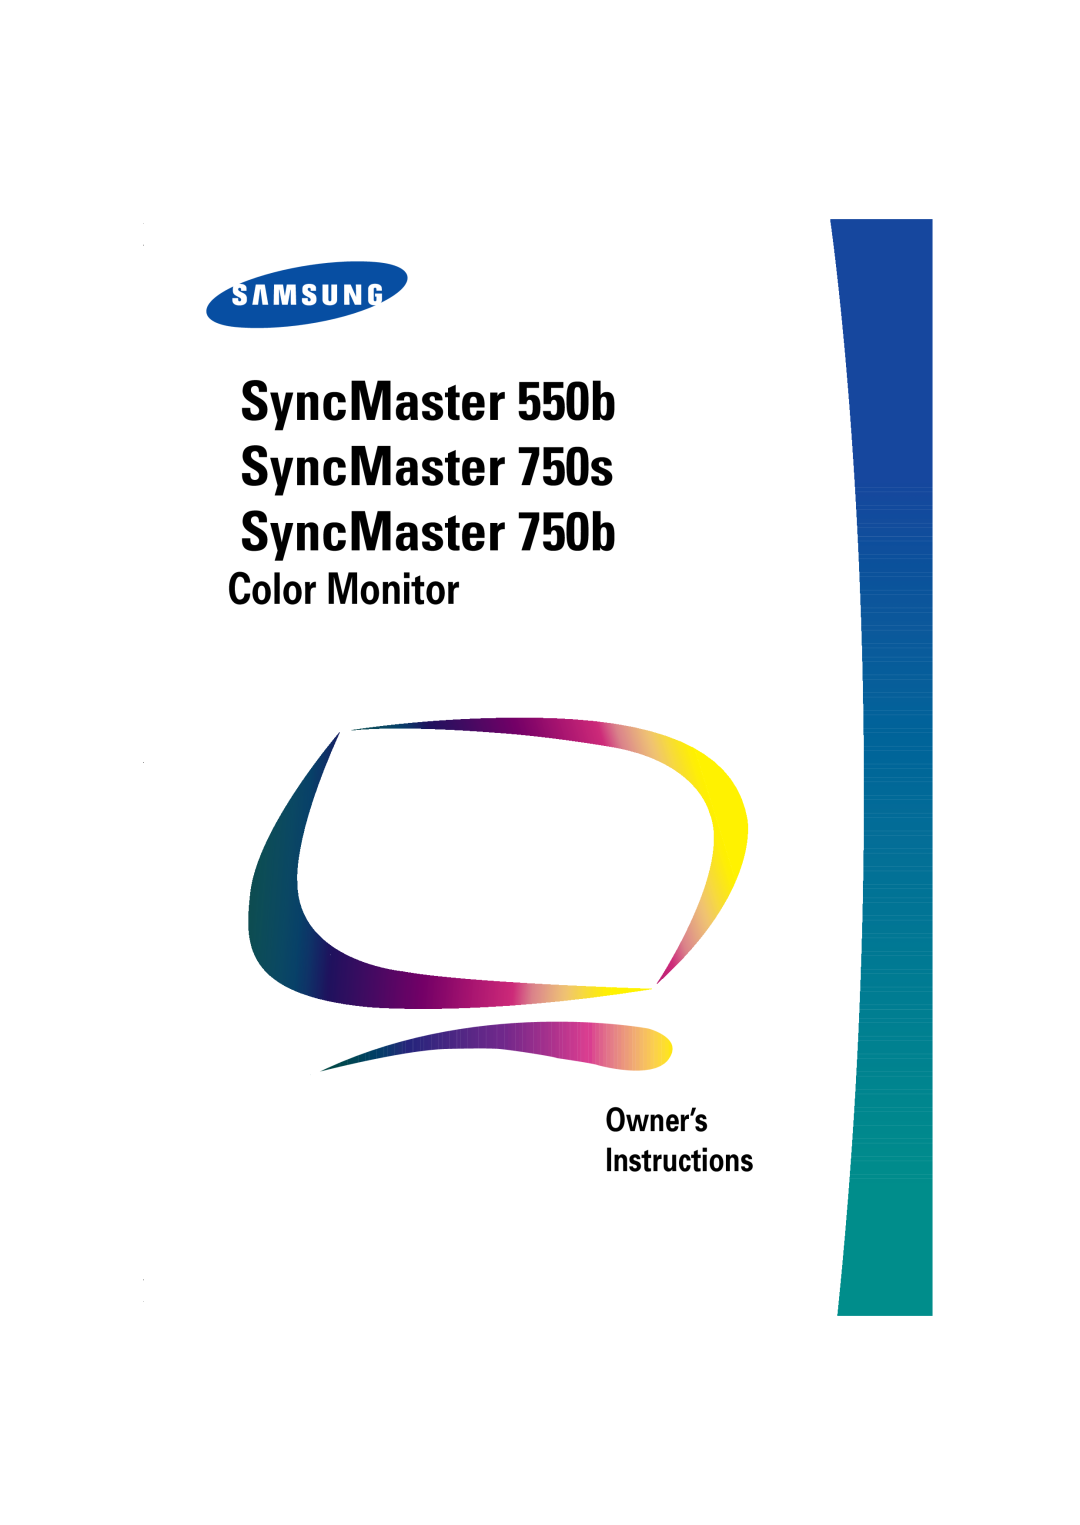 Samsung 550B manual SyncMaster 550b SyncMaster 750s SyncMaster 750b, Color Monitor, Owner’s Instructions 